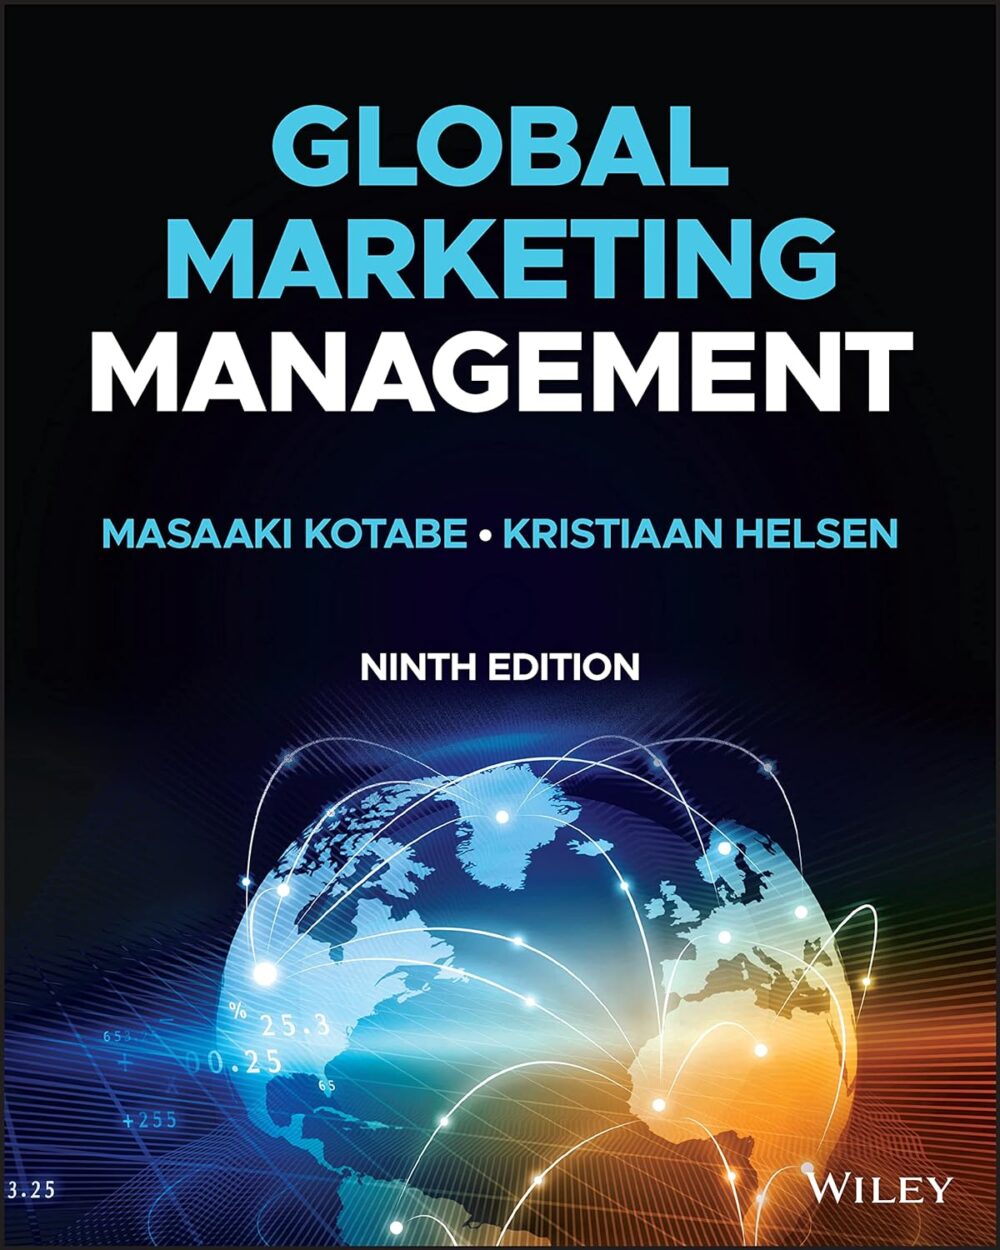 Global Marketing Management 9th Edition